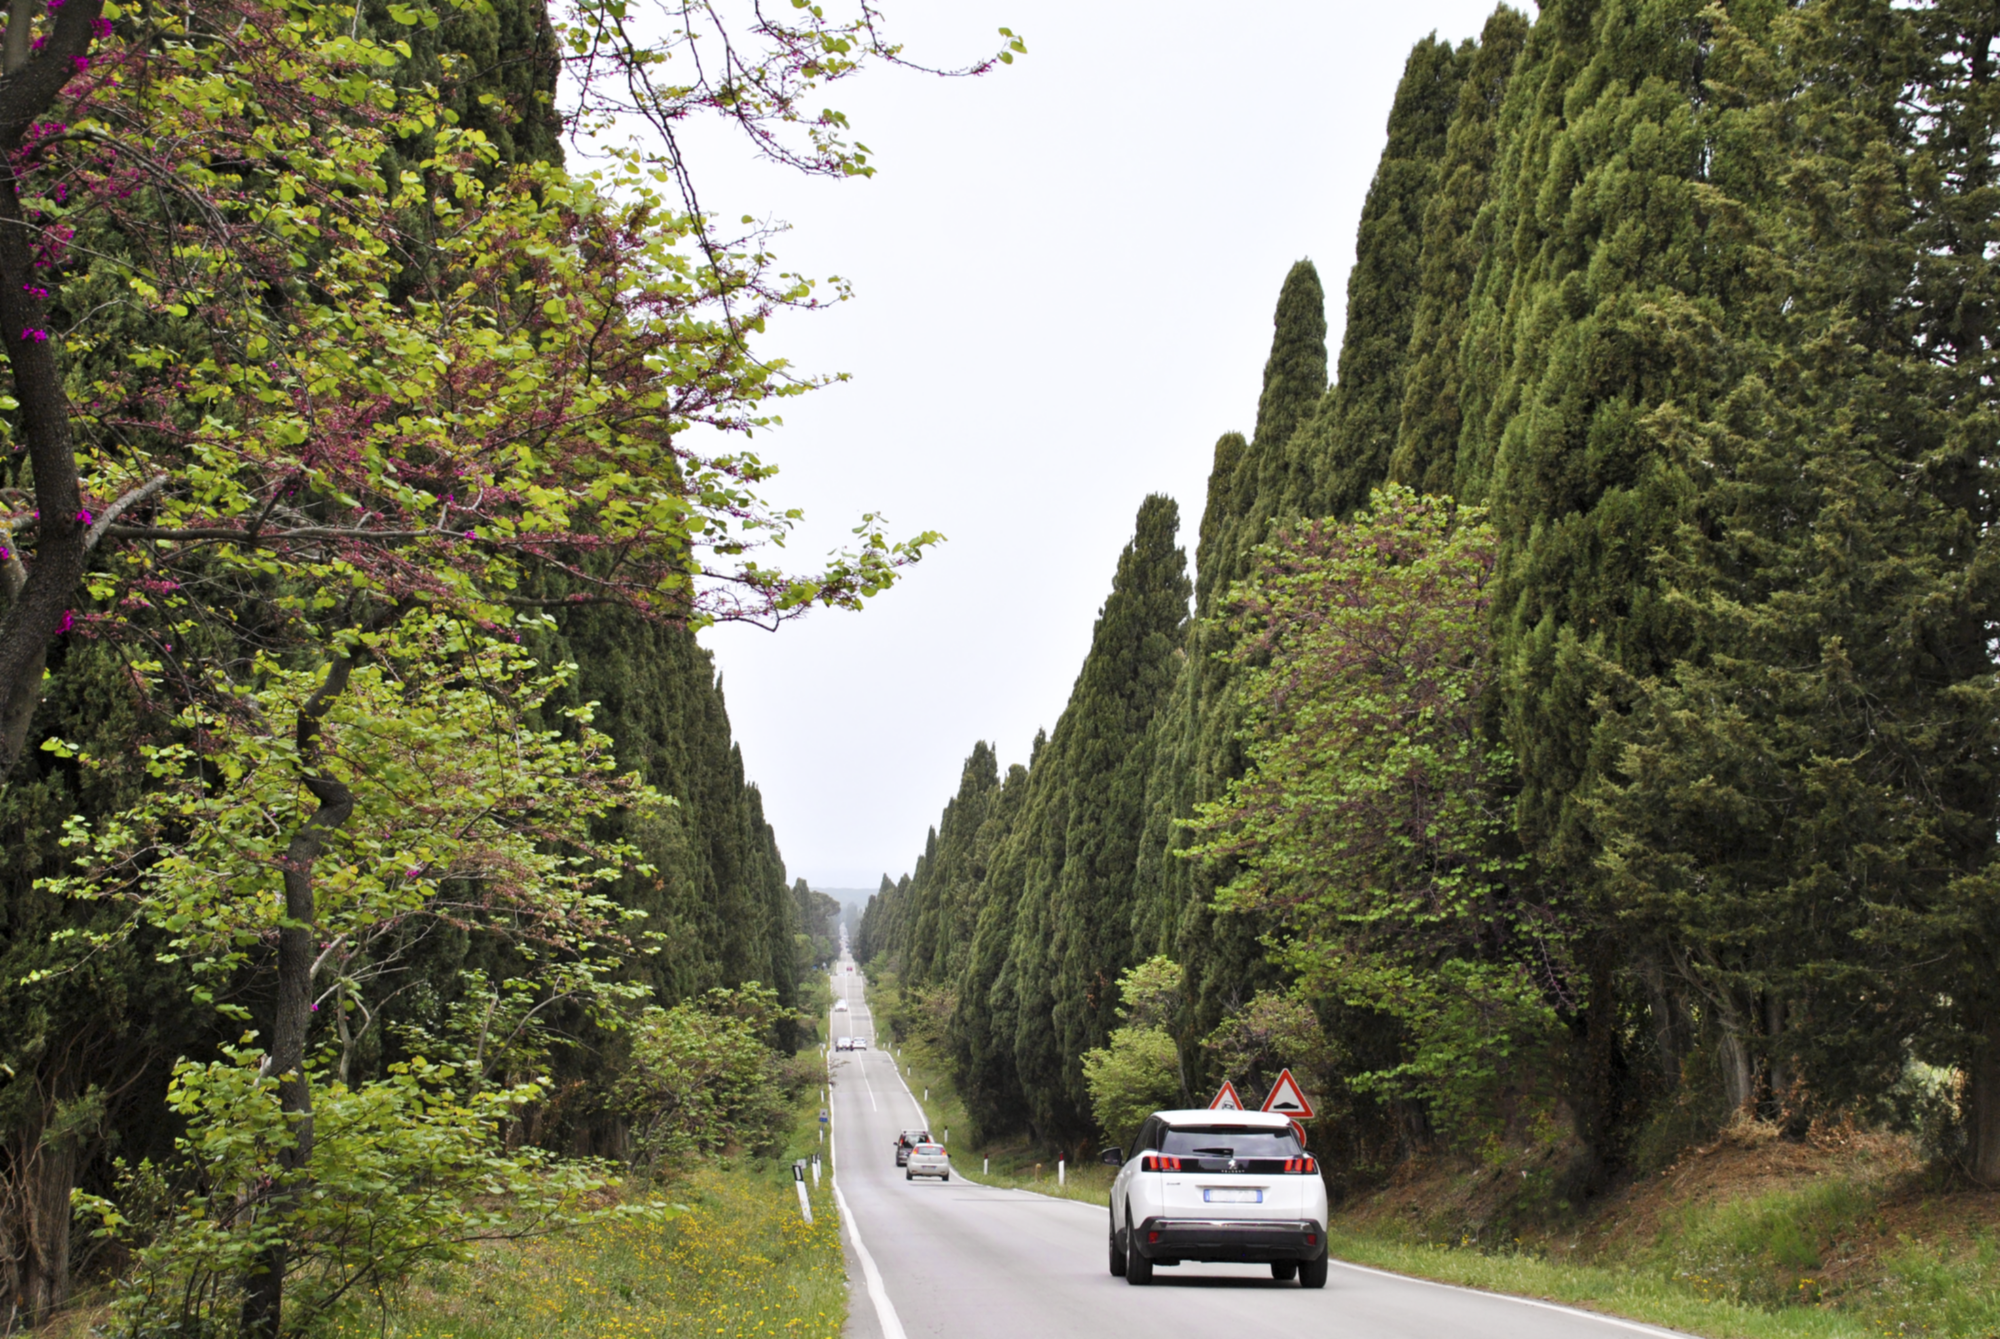 The Avenue of Cypresses